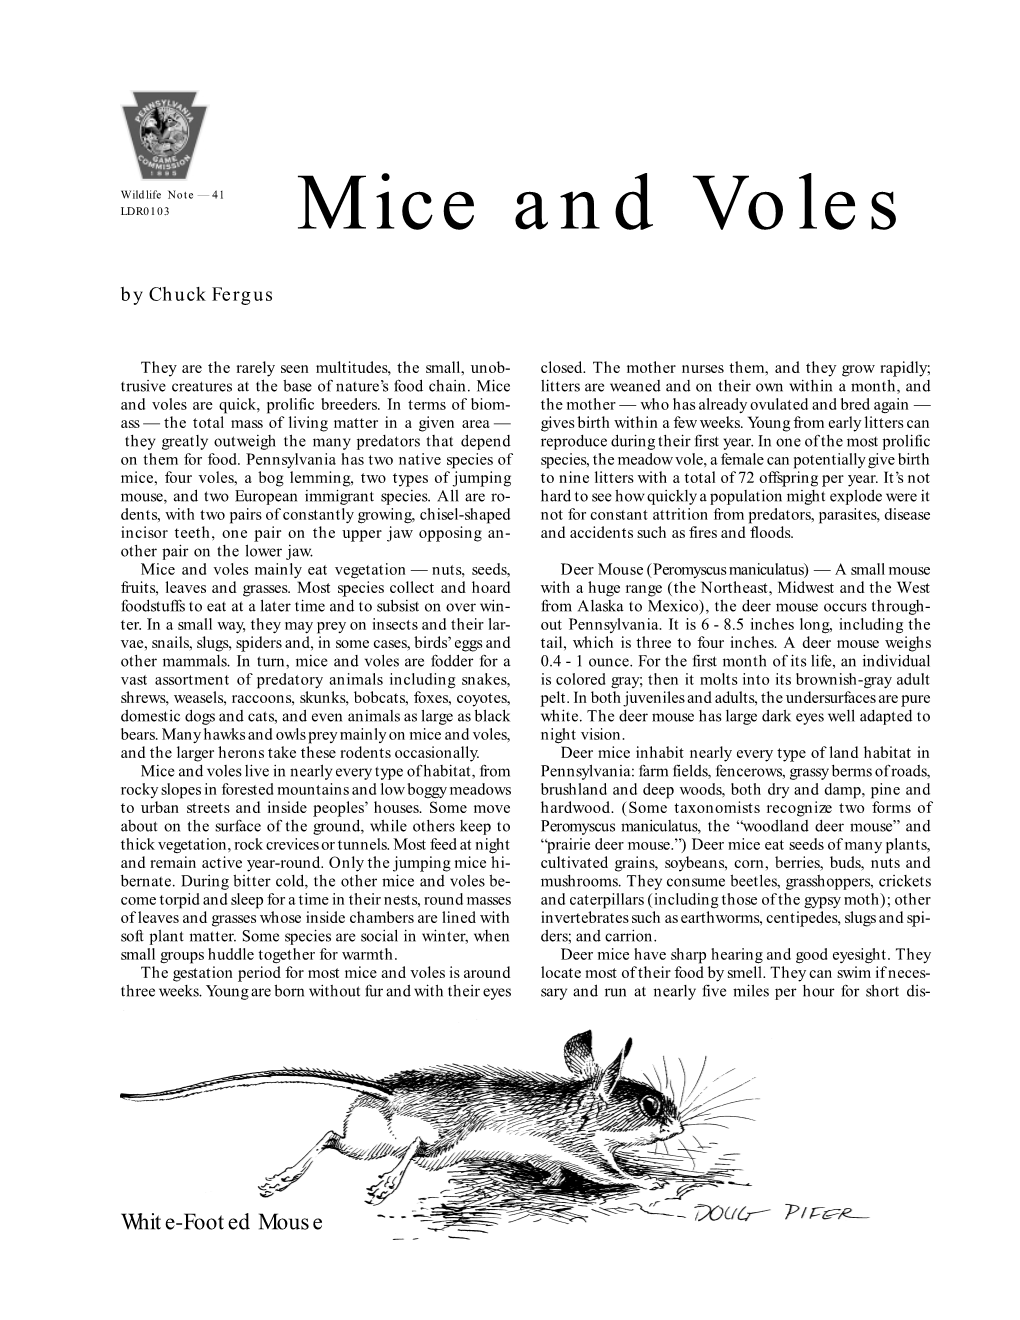 Mice and Voles by Chuck Fergus